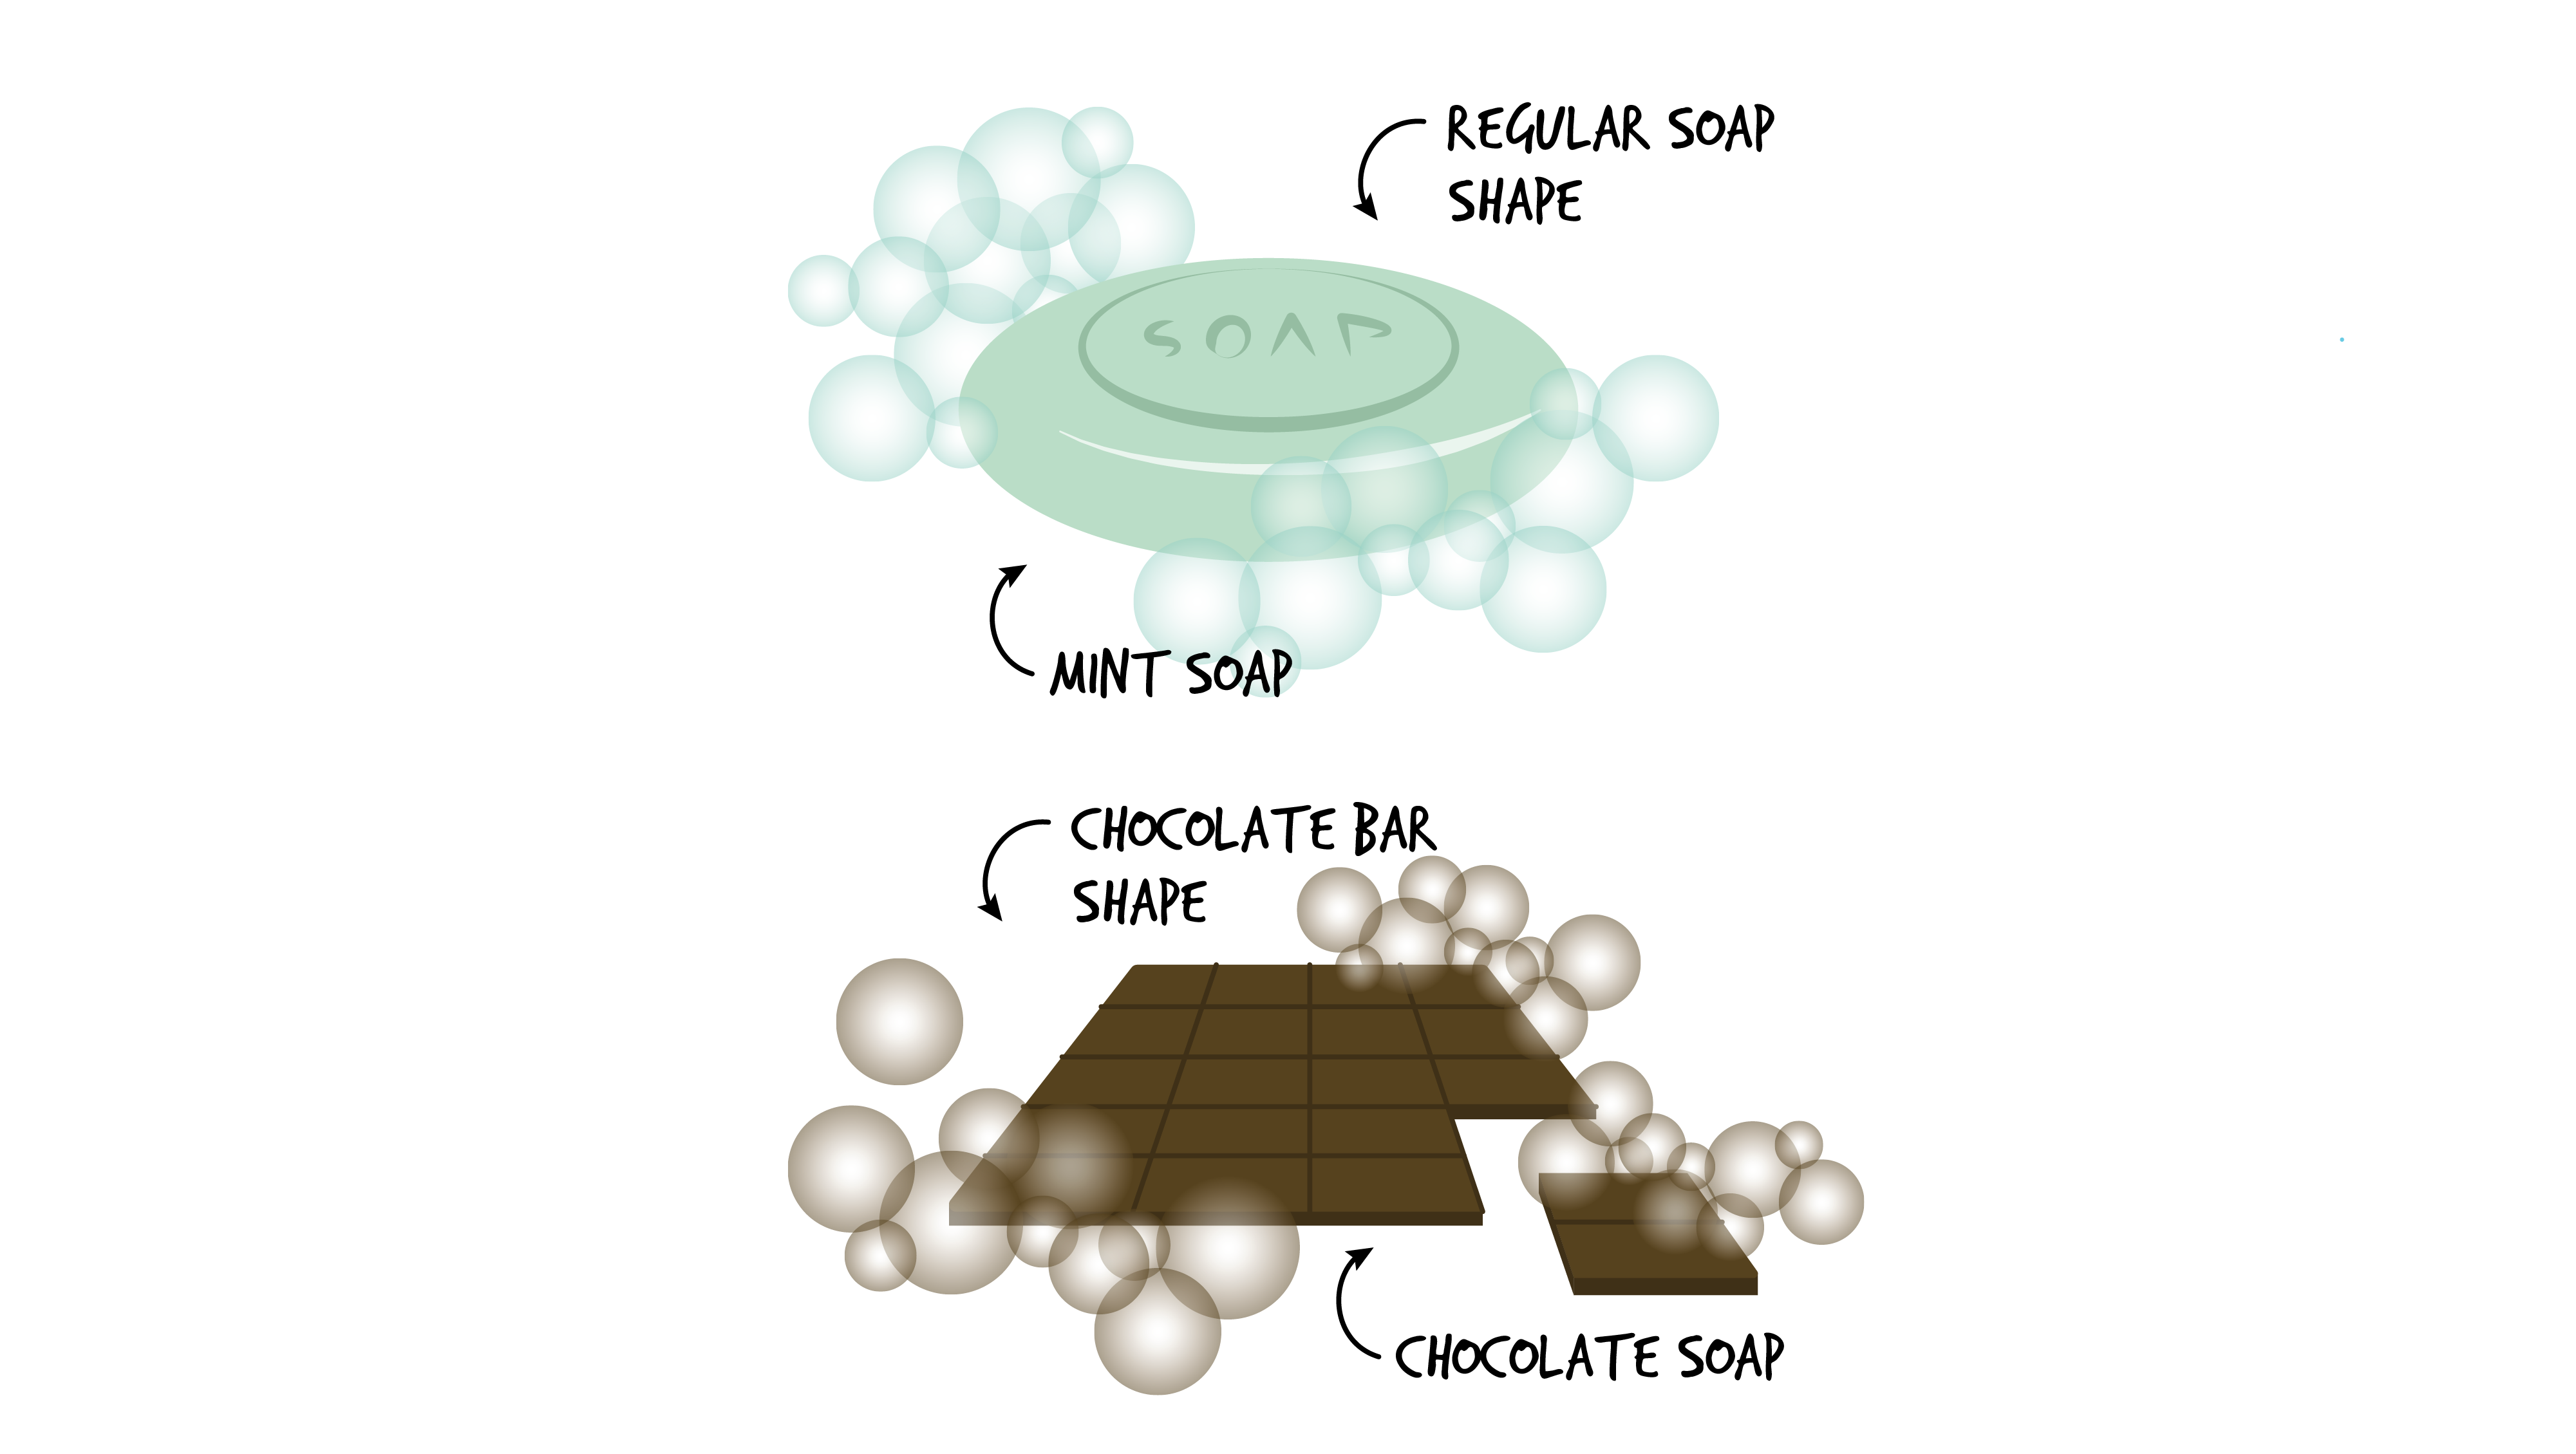 On the top is a green soap bar with bubbles all around it. The text above the soap reads: regular soap shape. The text below reads: mint soap. On the bottom is a brown soap bar in the shape of a chocolate bar, surrounded by bubbles. Two pieces from bottom right corner are cut off. The text above the soap reads: chocolate bar shape. The text below reads: chocolate soap.